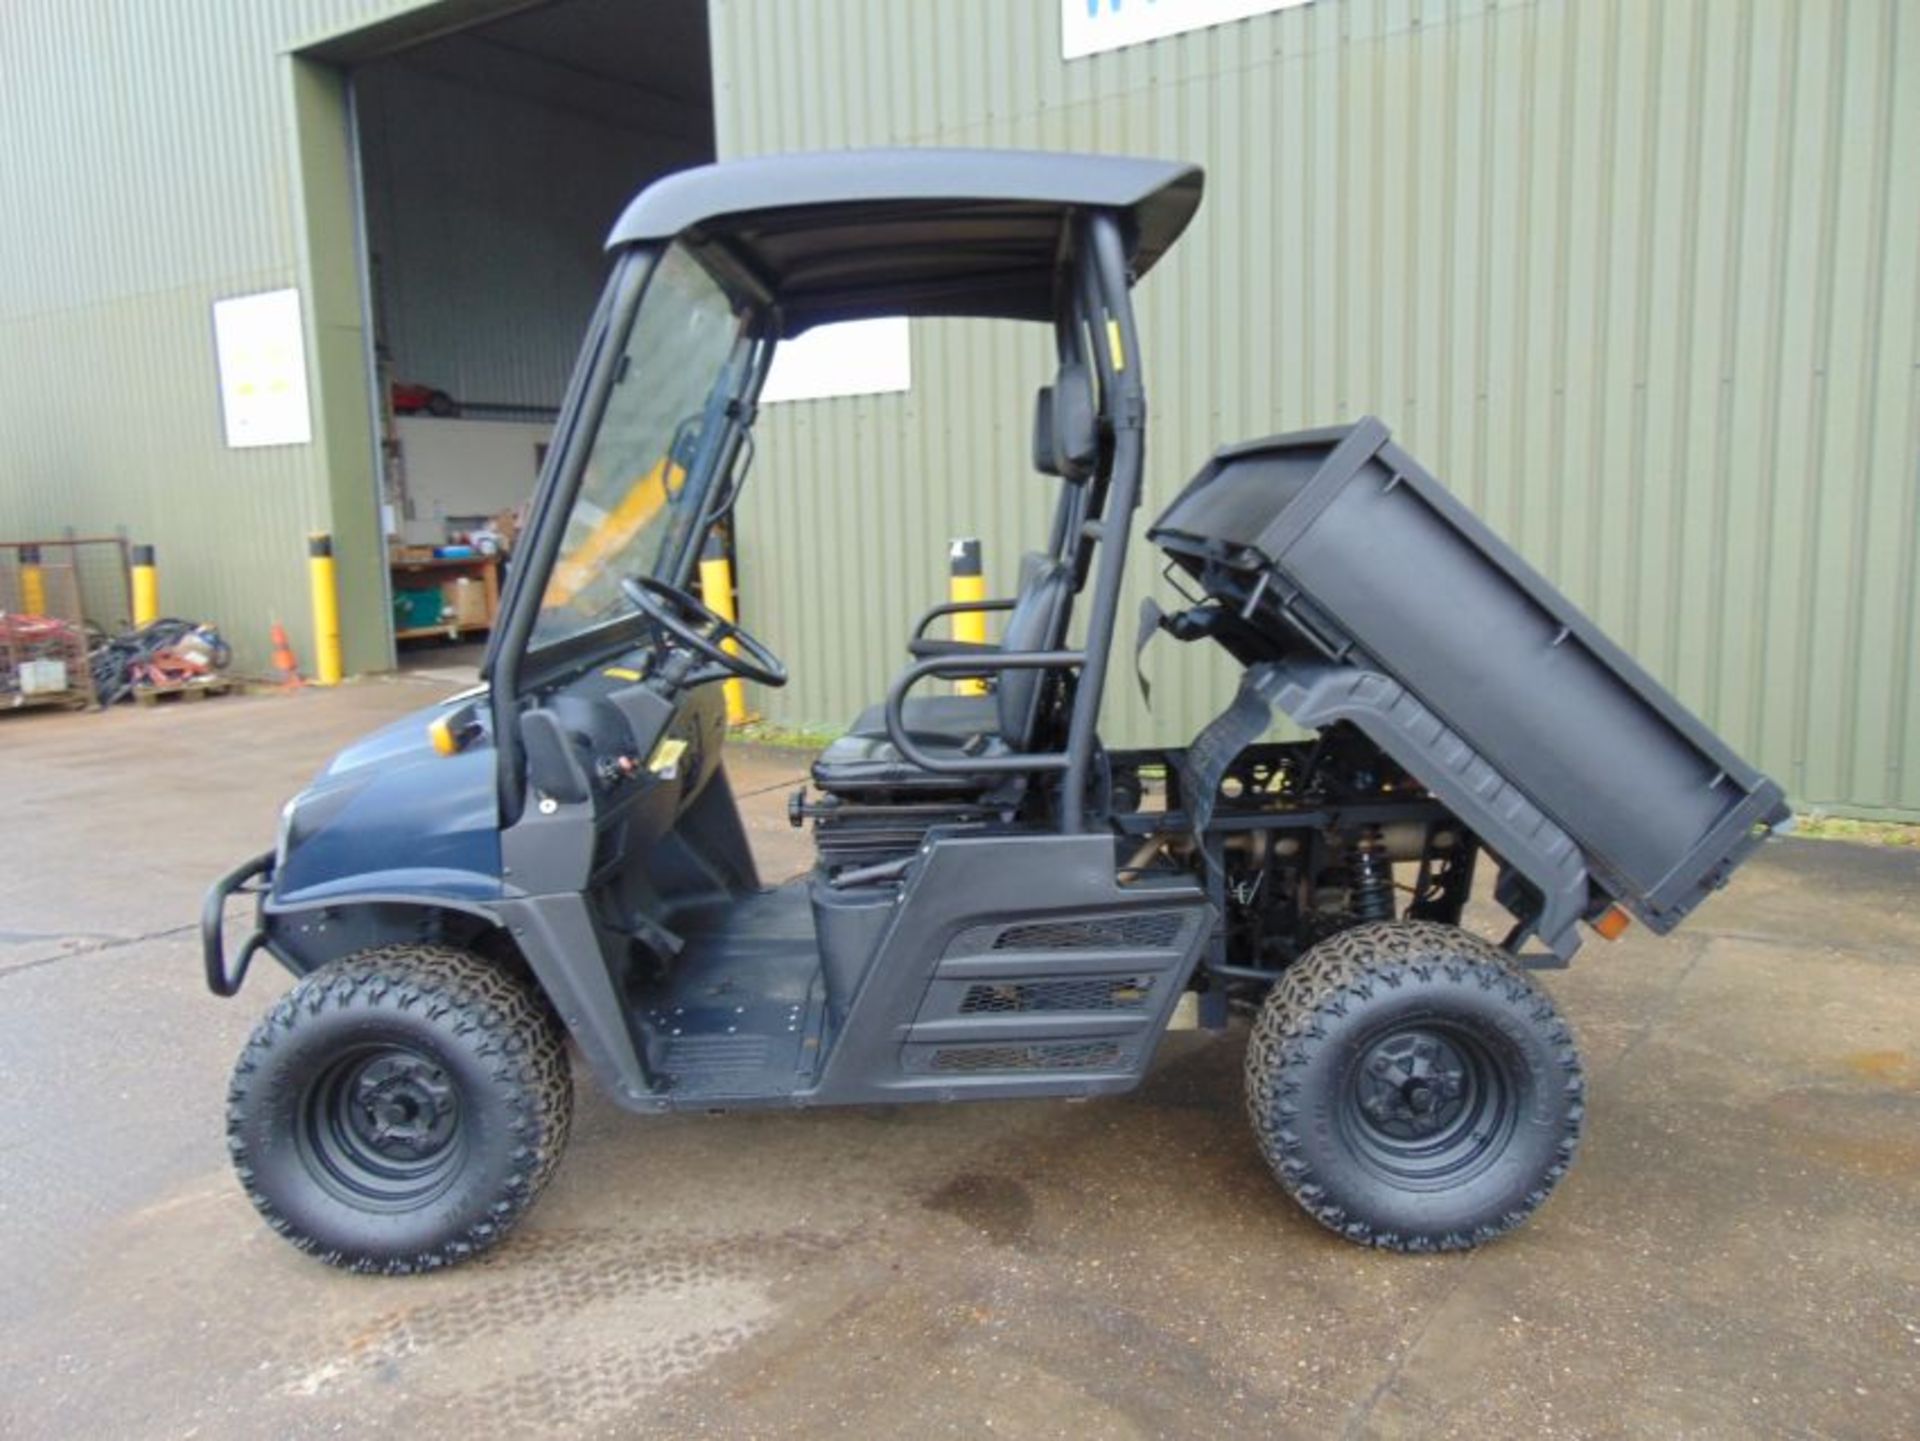 2014 Cushman XD1600 4x4 Diesel Utility Vehicle Showing 1104 hrs - Image 10 of 25